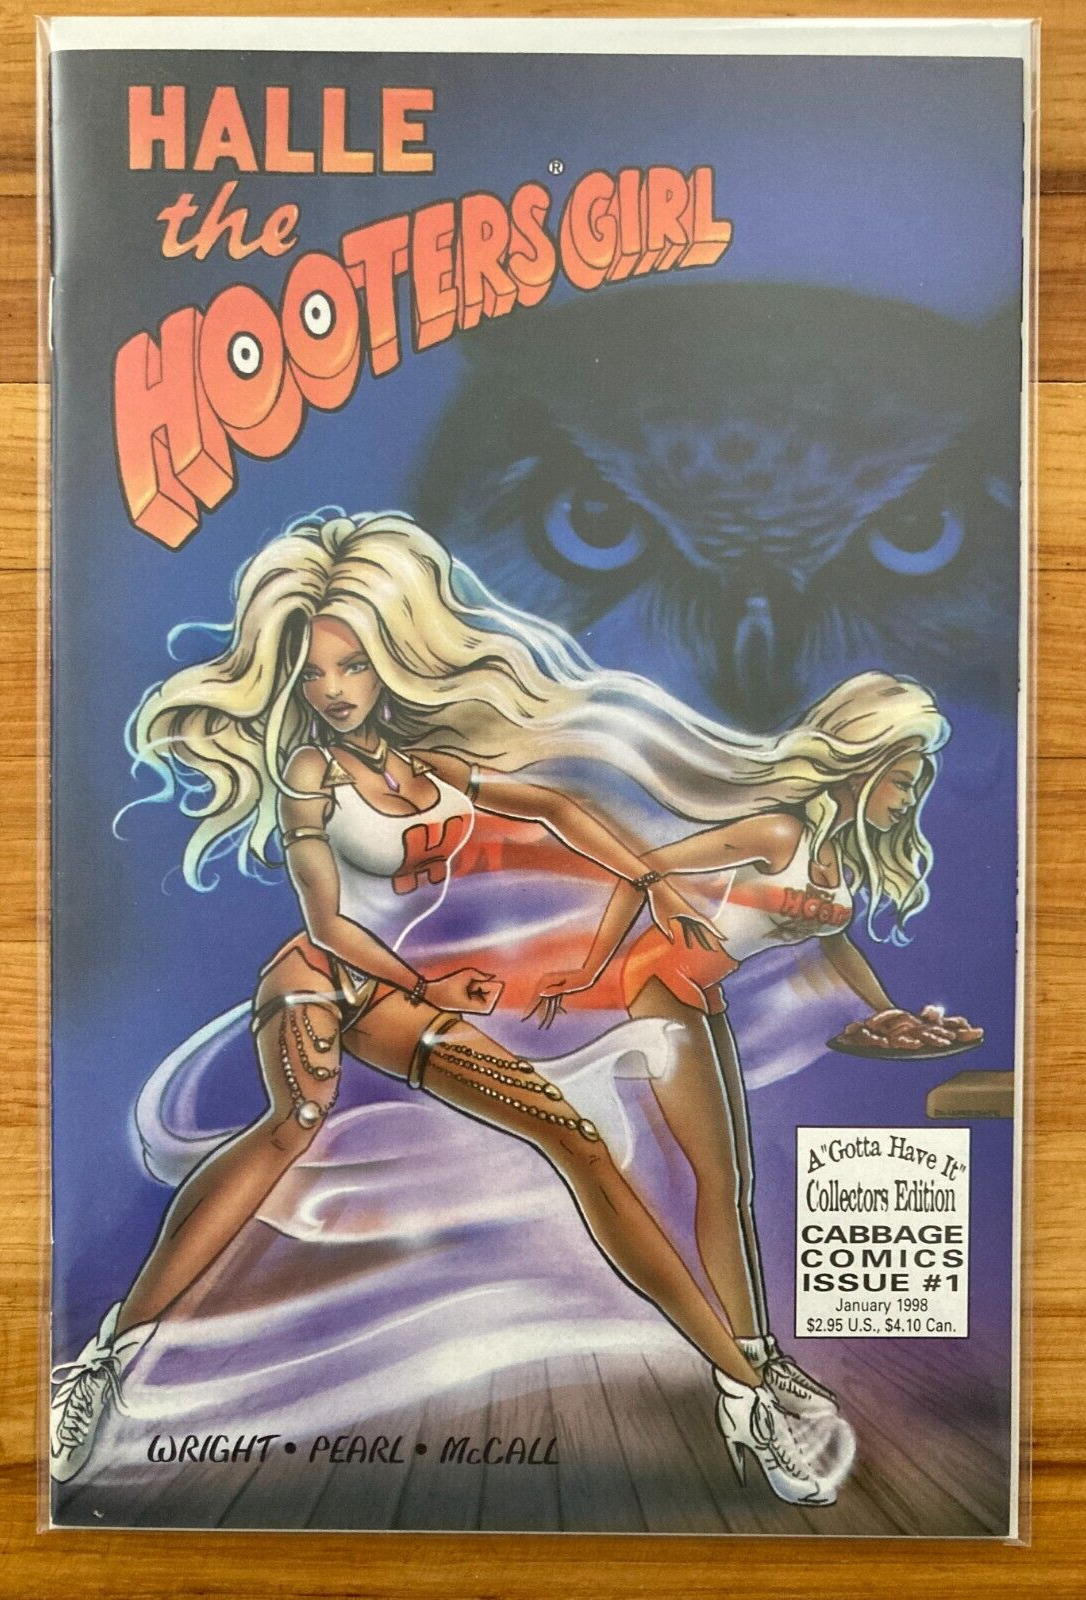 Halle The Hooters Girl Cabbage Comics Issue #1 Gotta Have It Collector's Edition